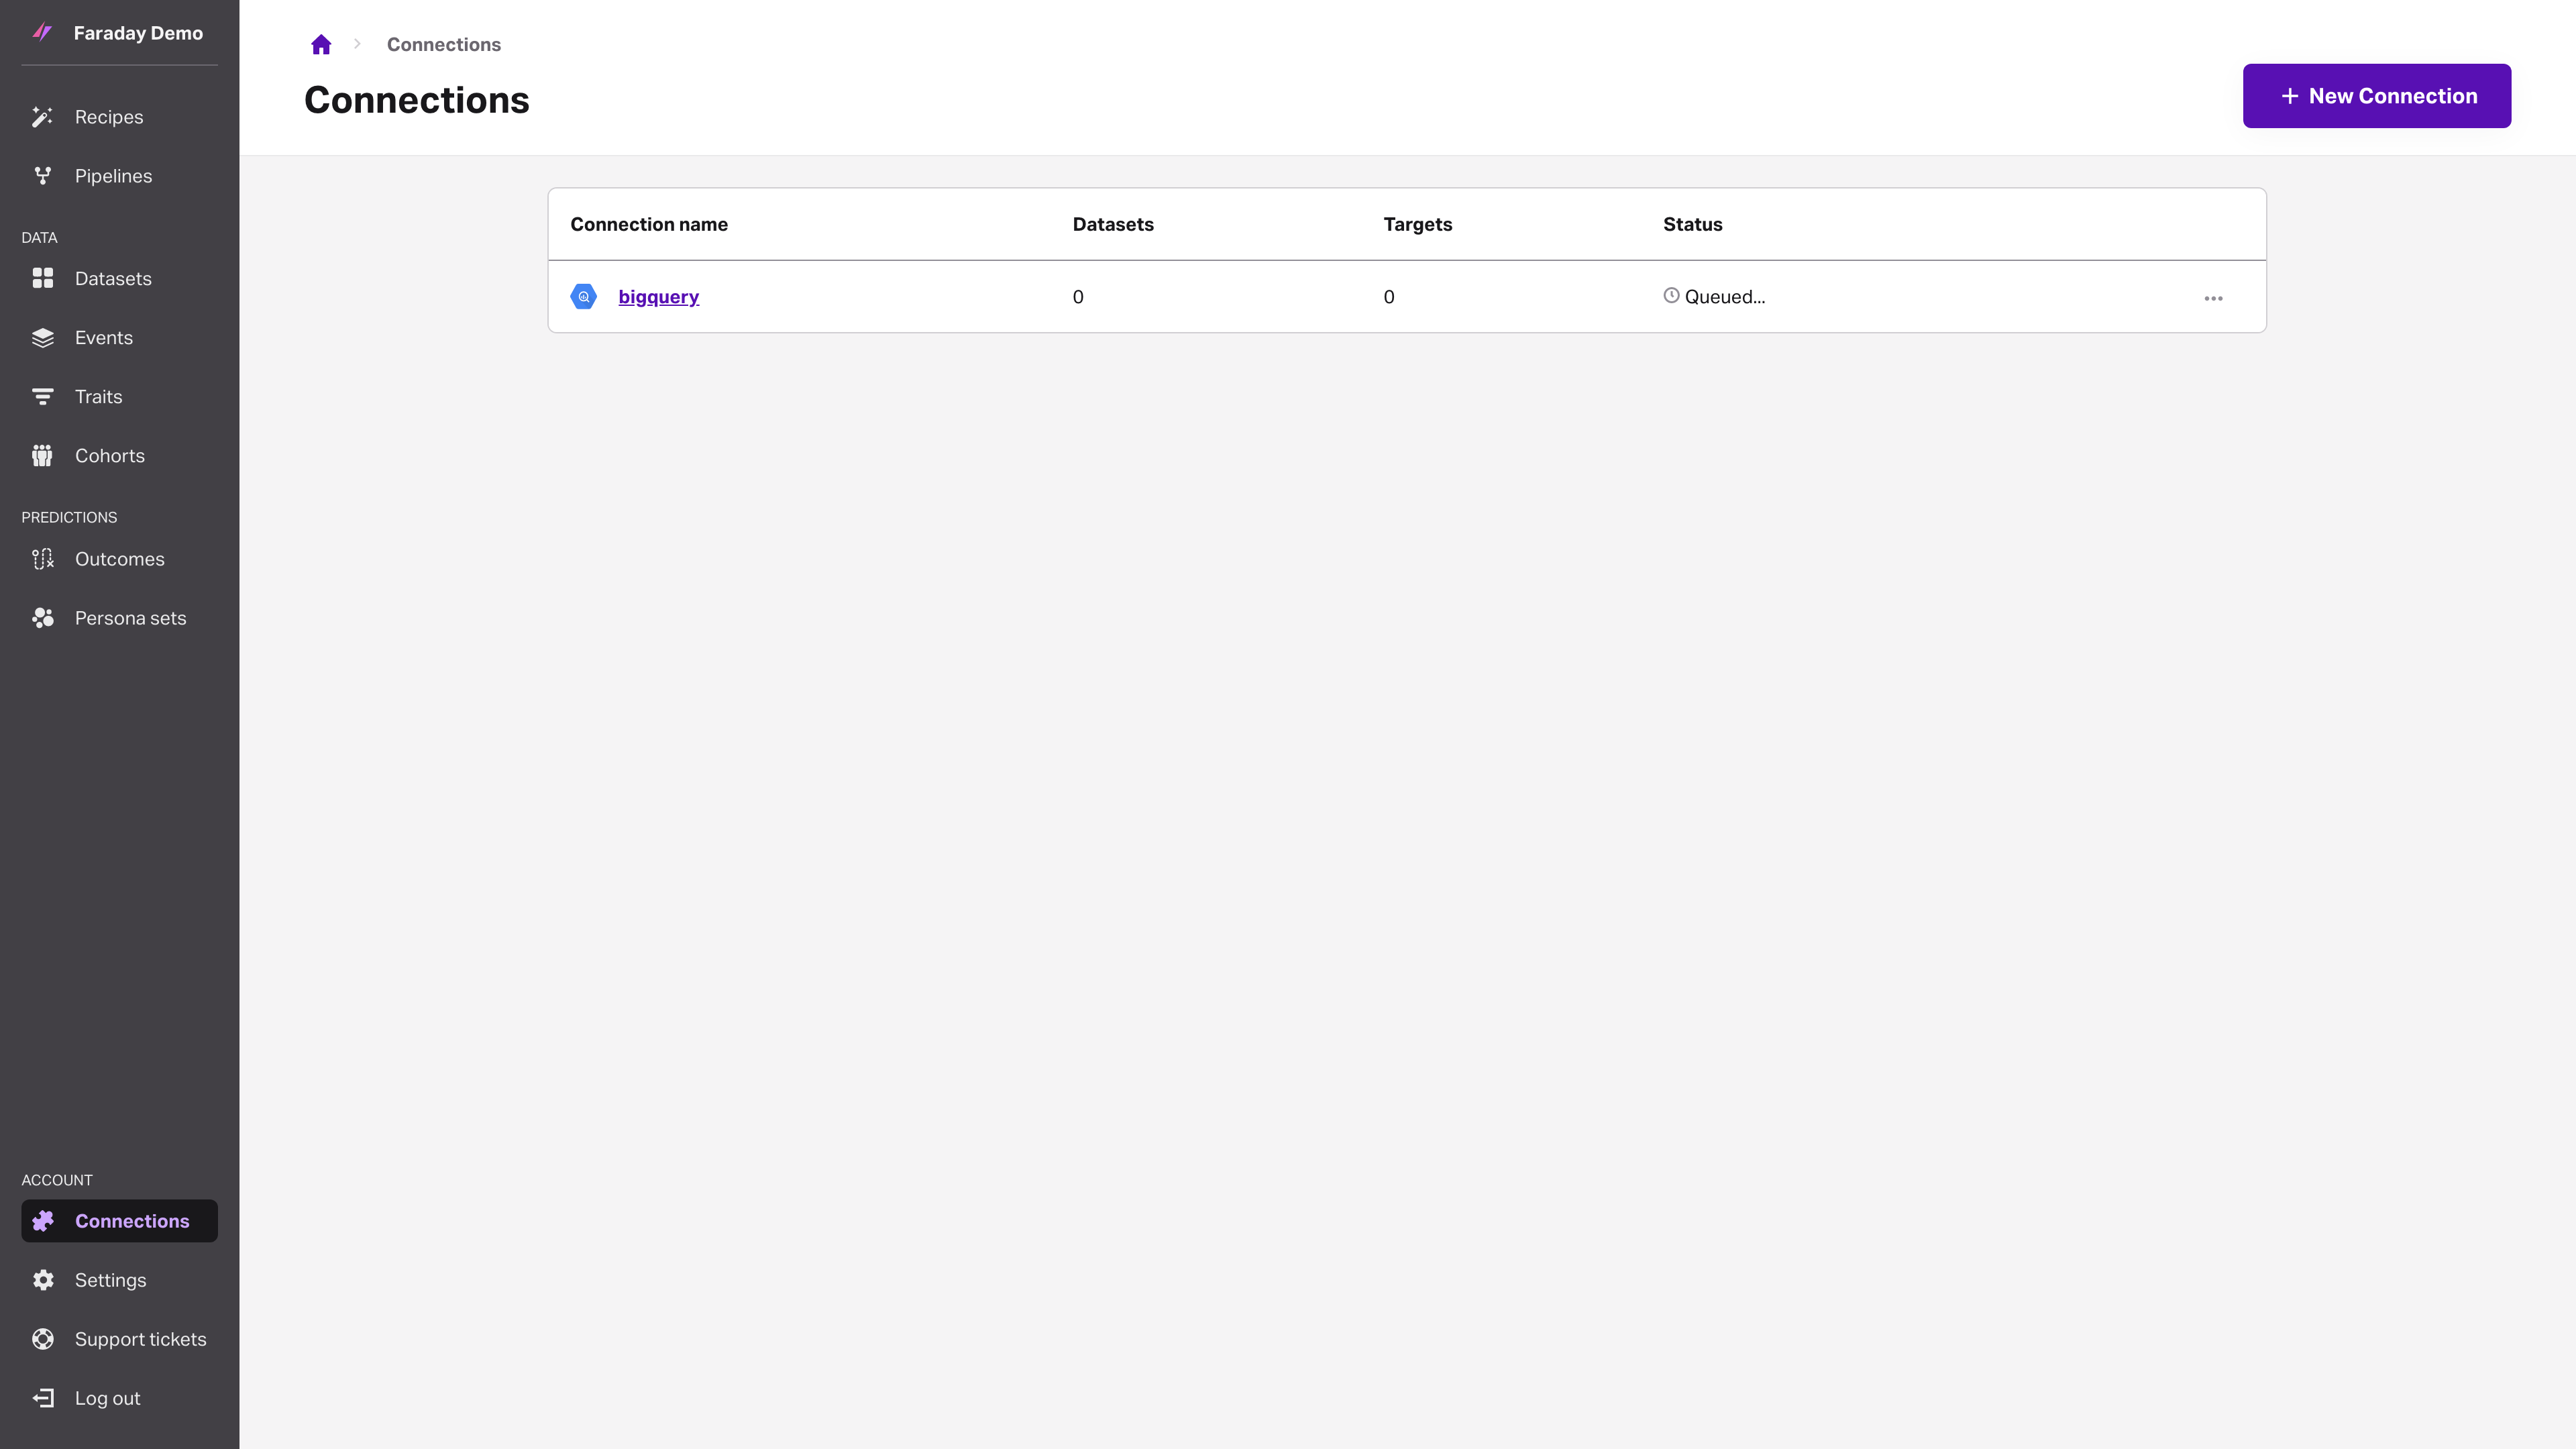 Screenshot of the connections listing that includes BigQuery